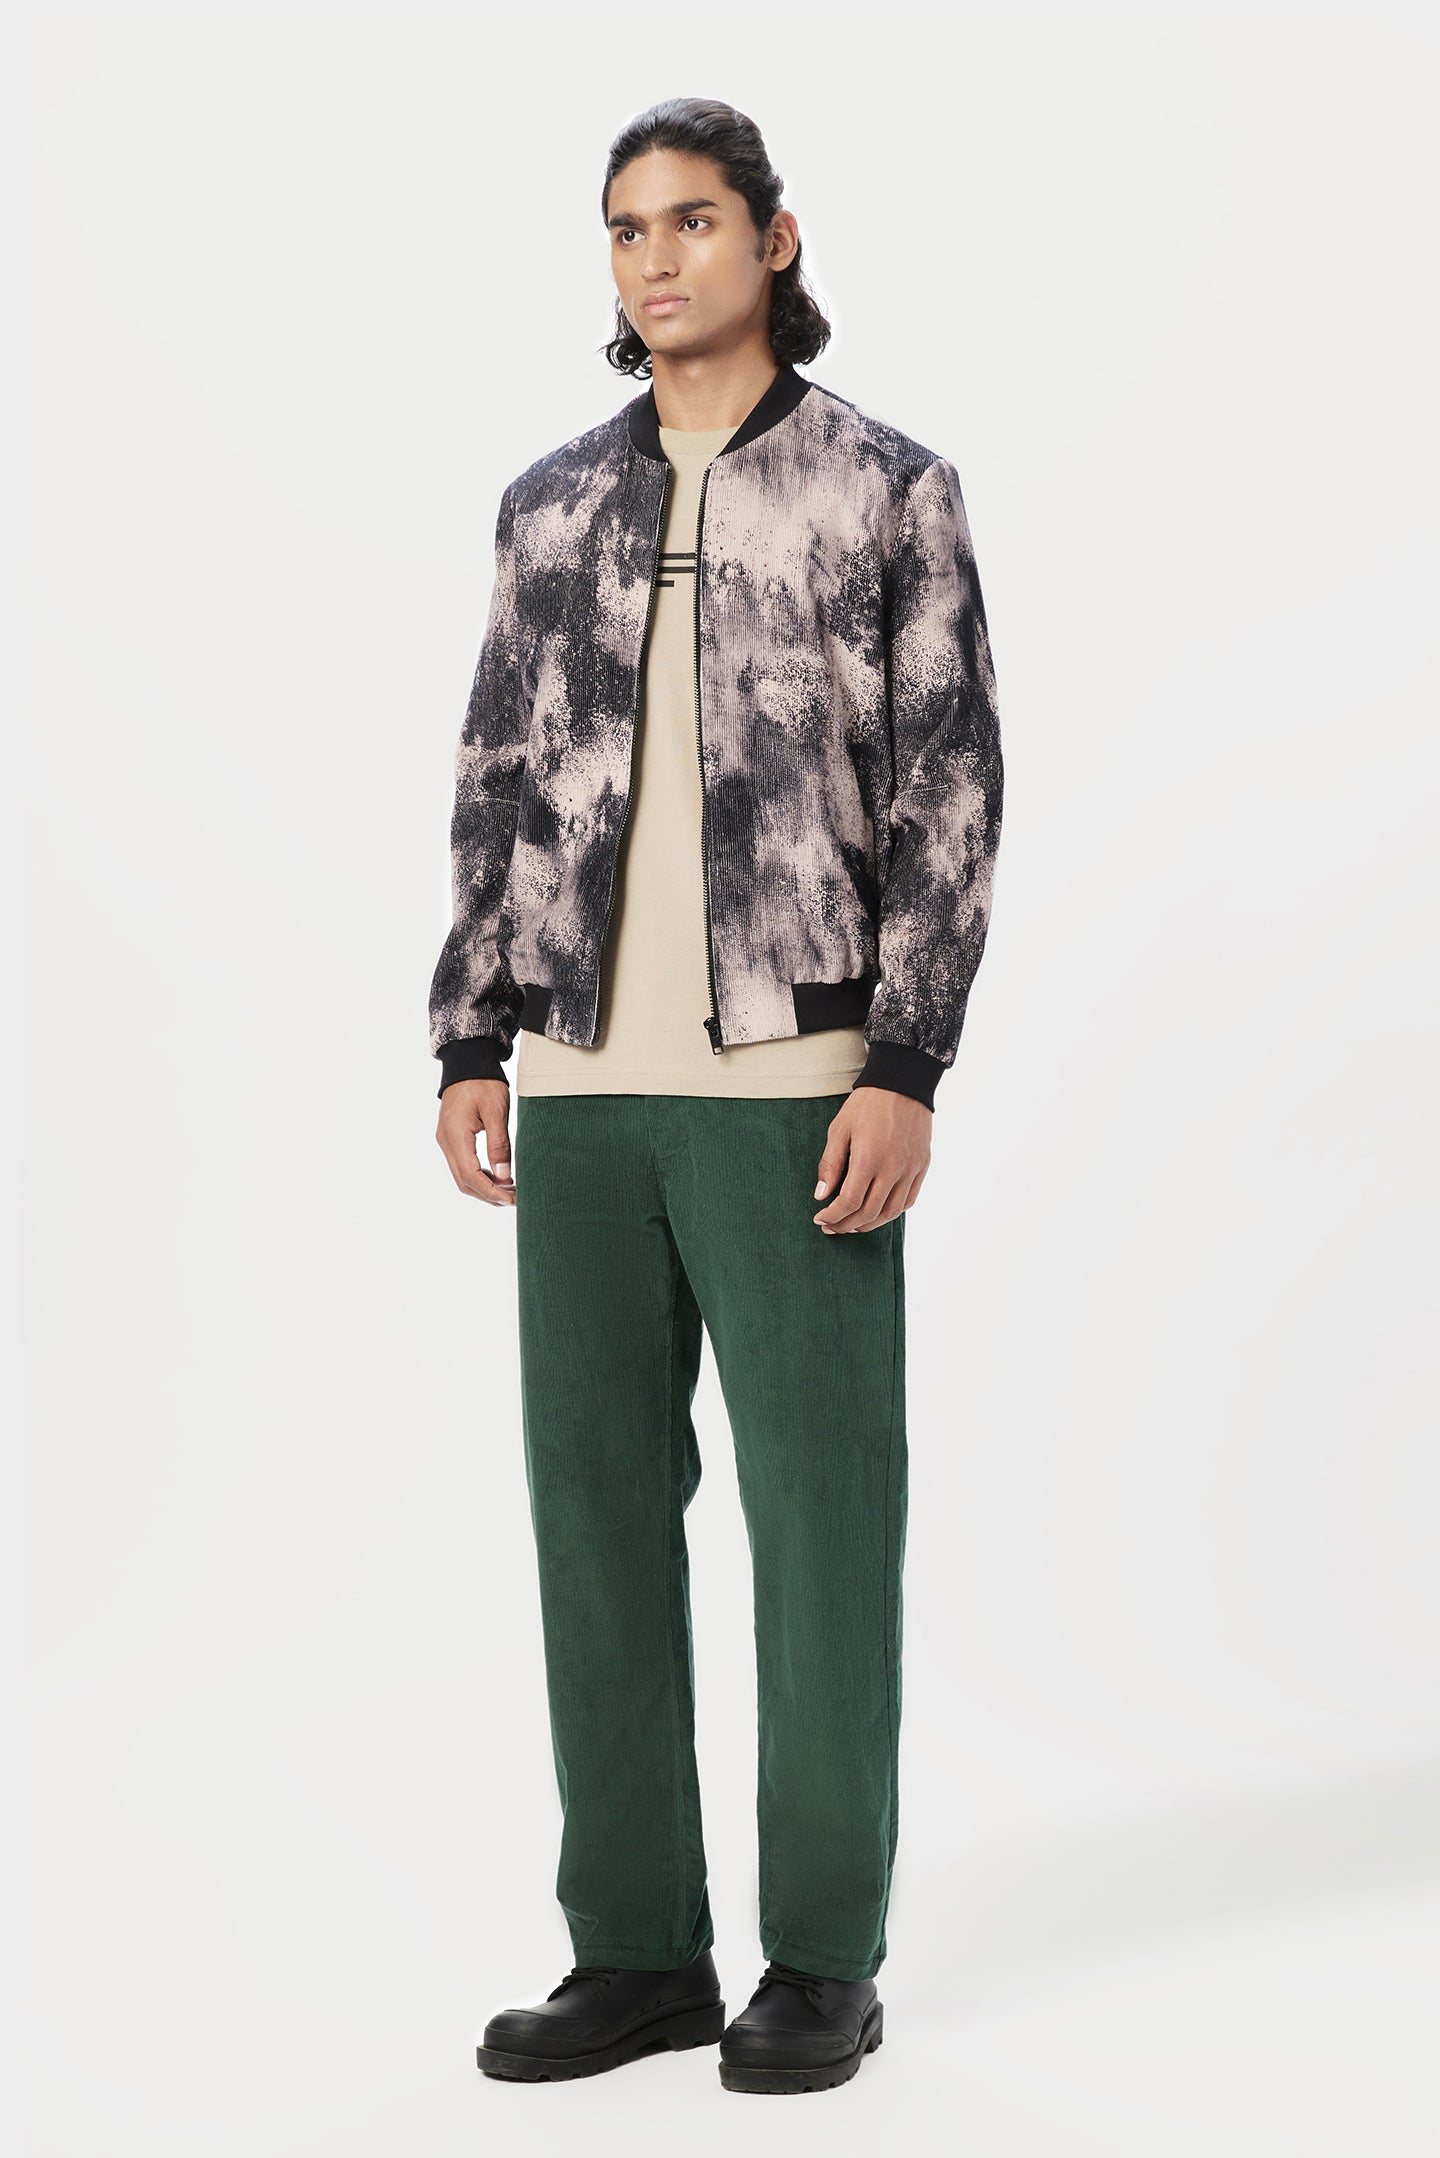 Easy Fit Bomber Jacket with Front Zipper Detail and All-Over Textured Print